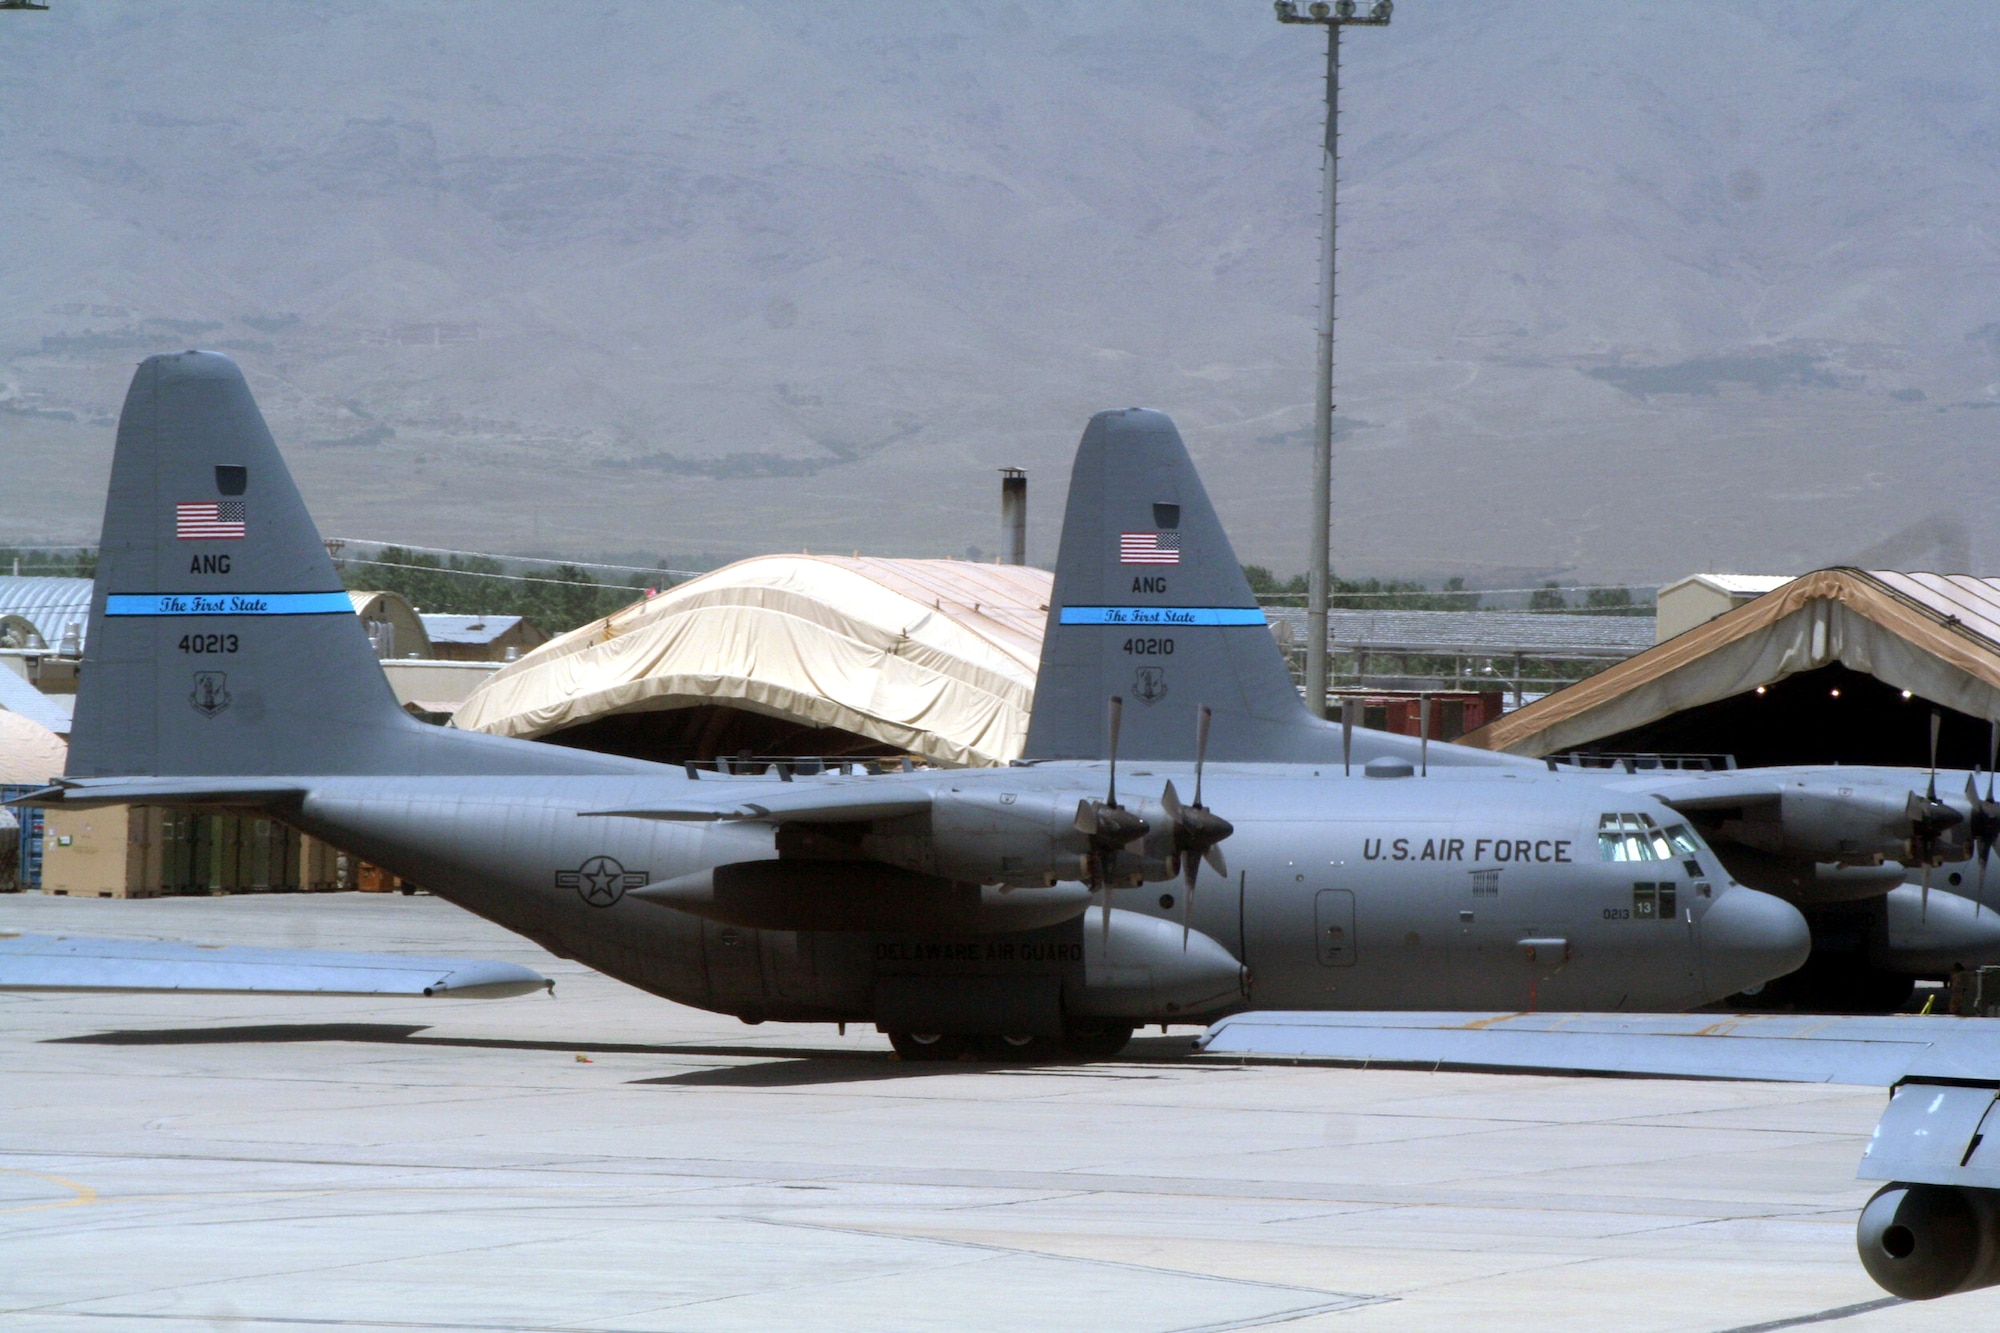 C-130 Hercules aircraft deployed with the 774th Expeditionary Airlift Squadron are shown on the flightline at Bagram Airfield, Afghanistan, on June 6, 2011.  The 774th EAS is part of the 455th Air Expeditionary Wing at Bagram Airfield. (U.S. Air Force Photo/Master Sgt. Scott T. Sturkol)